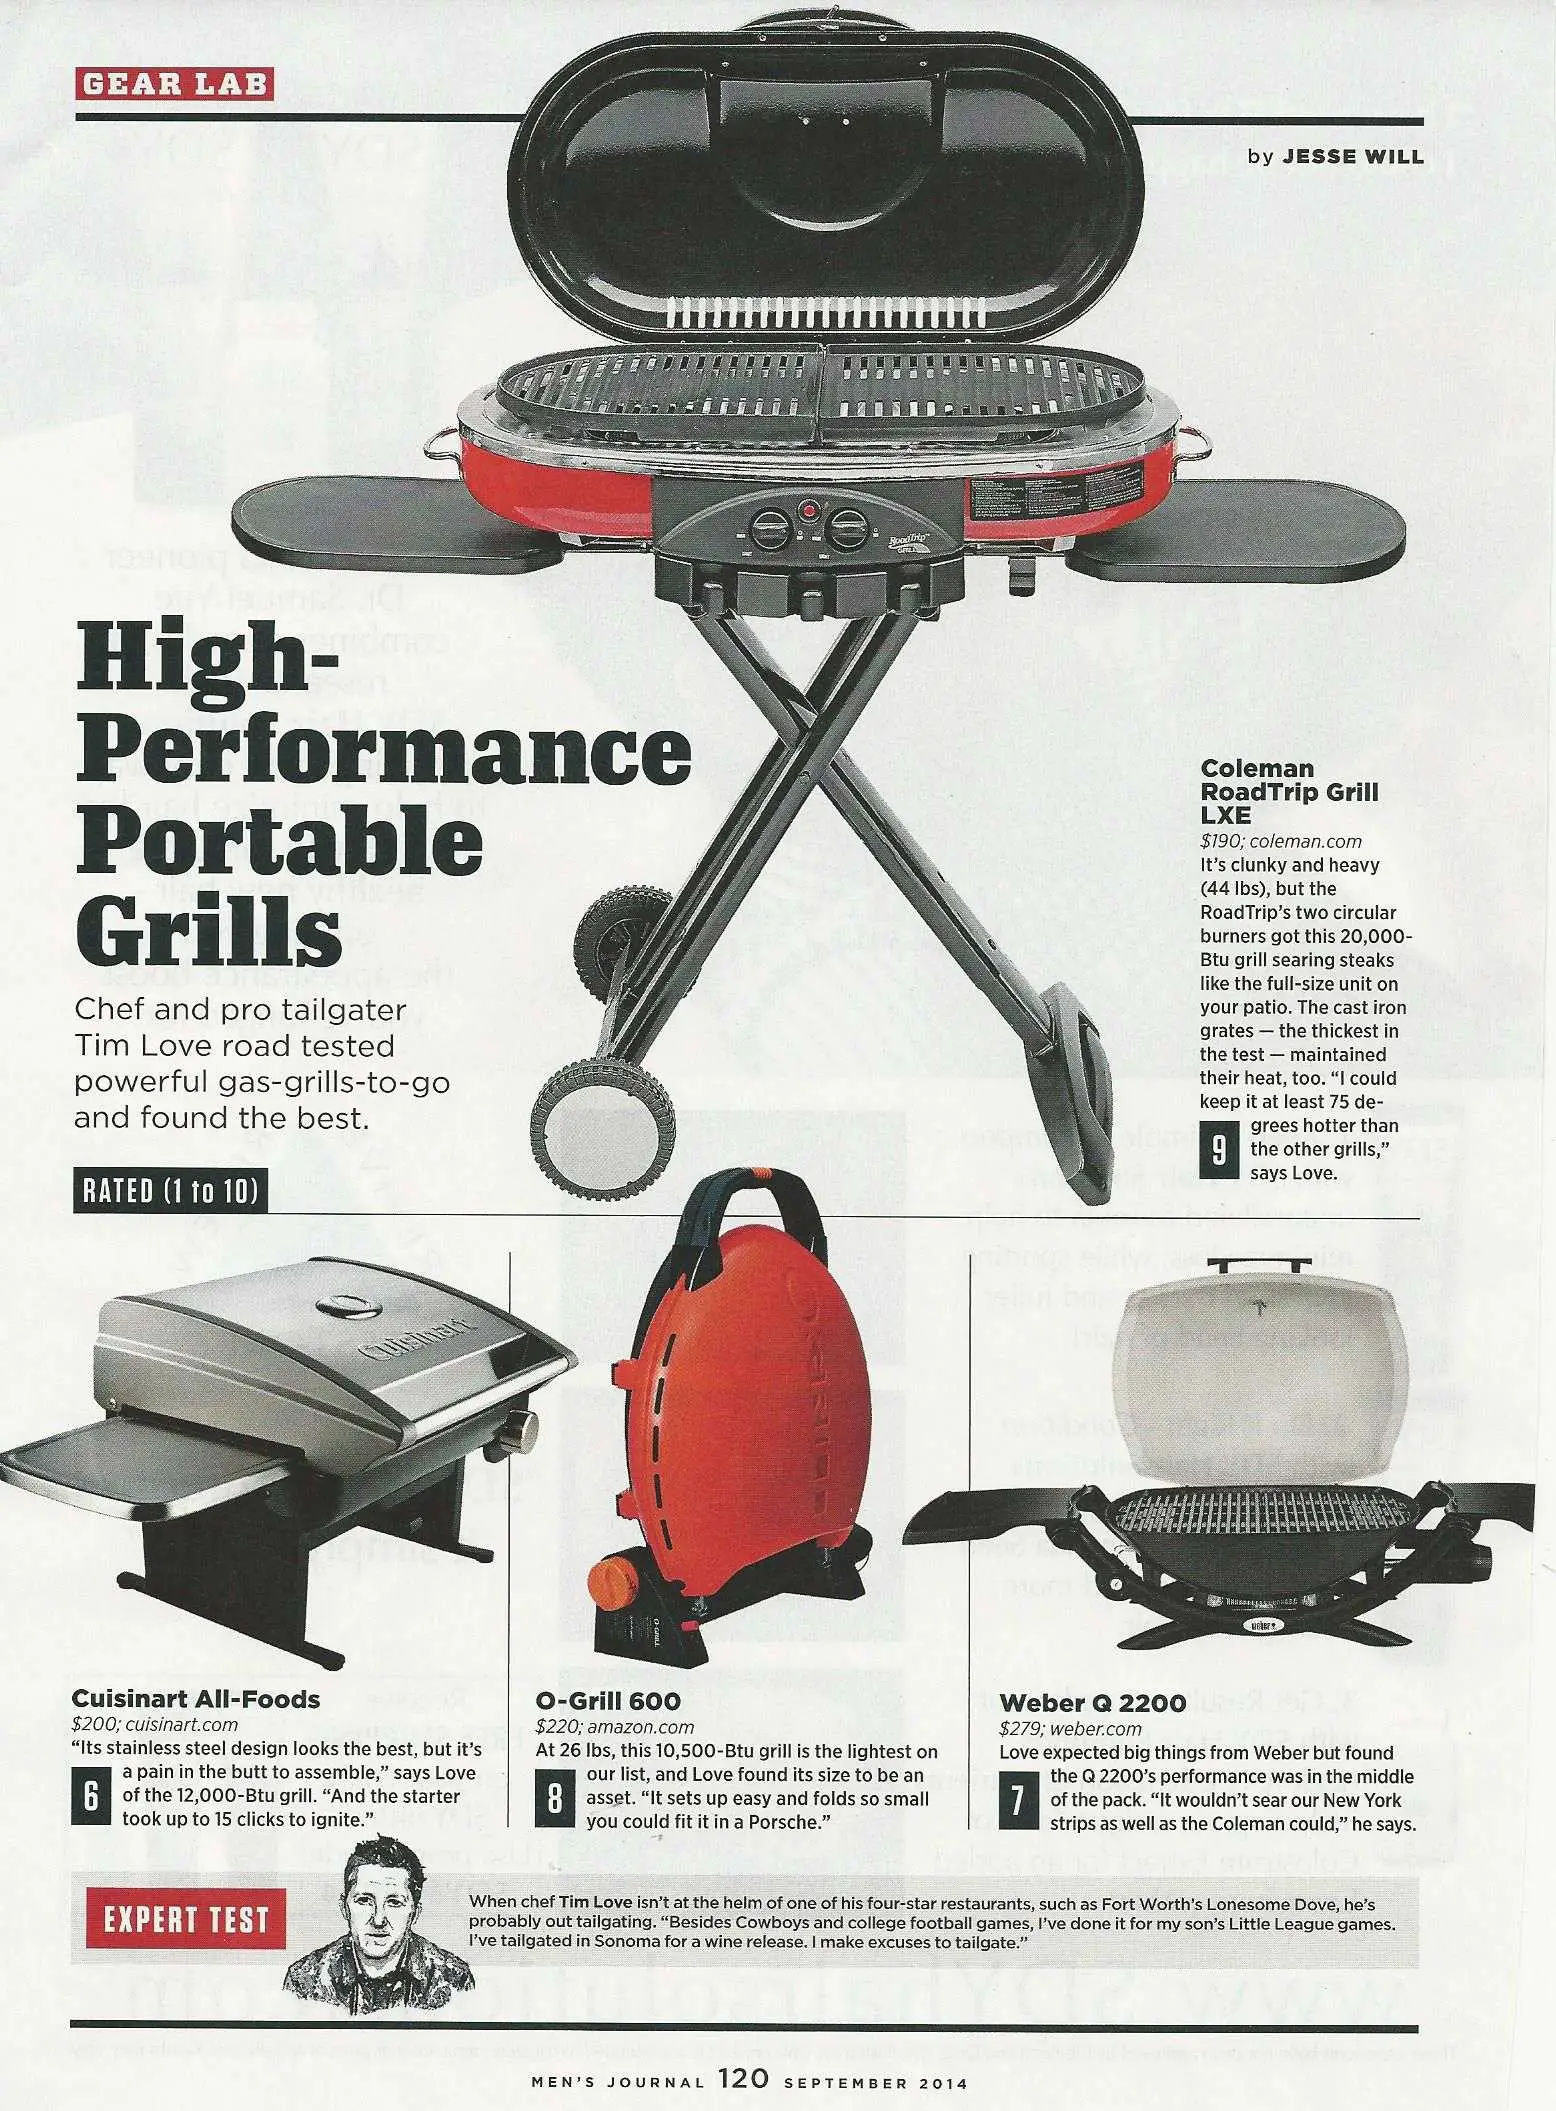 The best portable grills from @MensJournal (who is buying ...